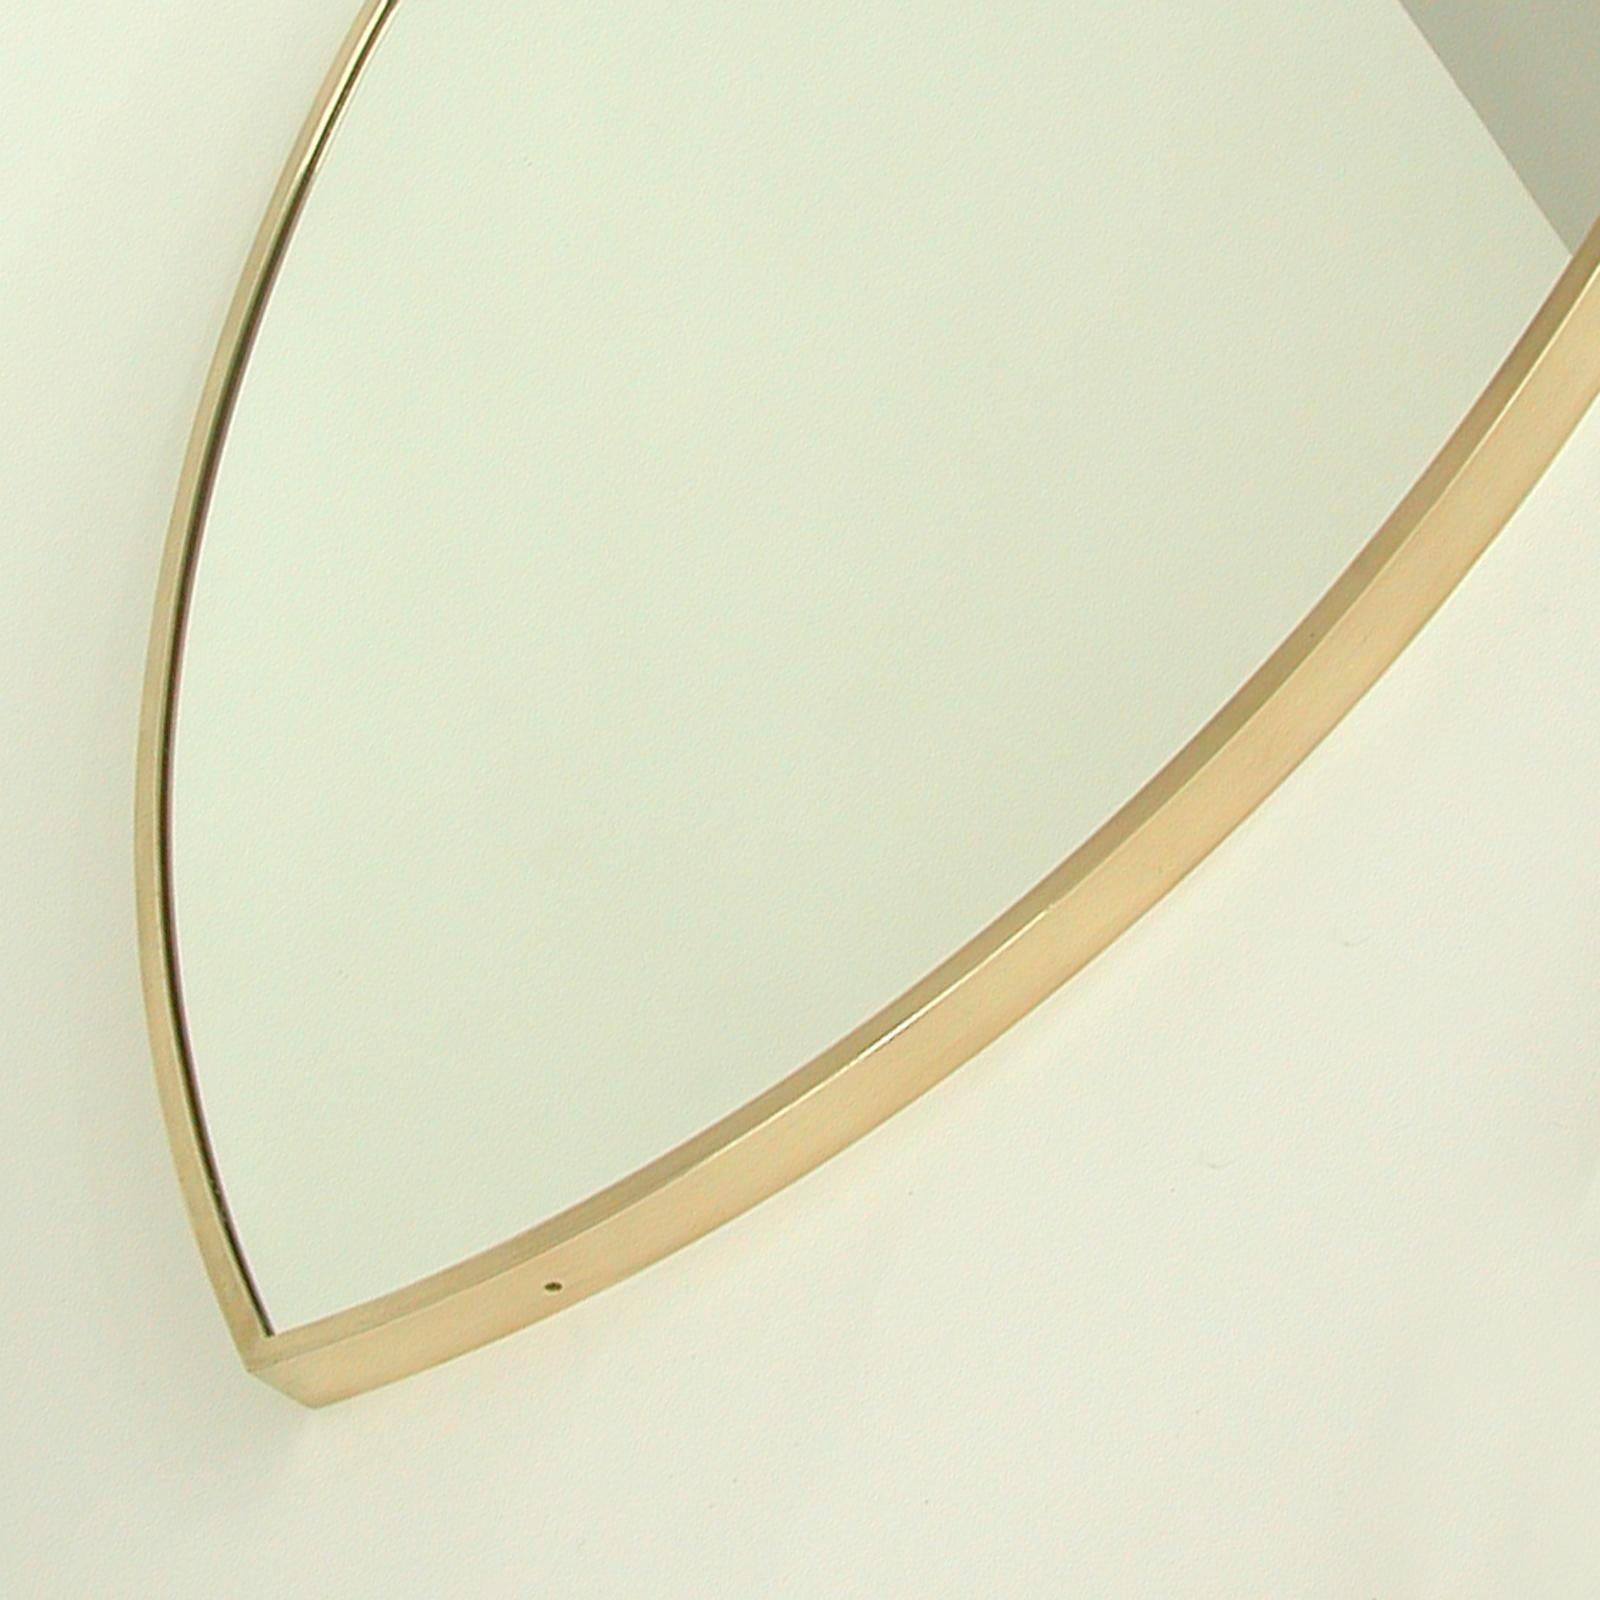 Midcentury Brass Shield Shaped Wall Mirror, Gio Ponti Style, Italy 1950s For Sale 2